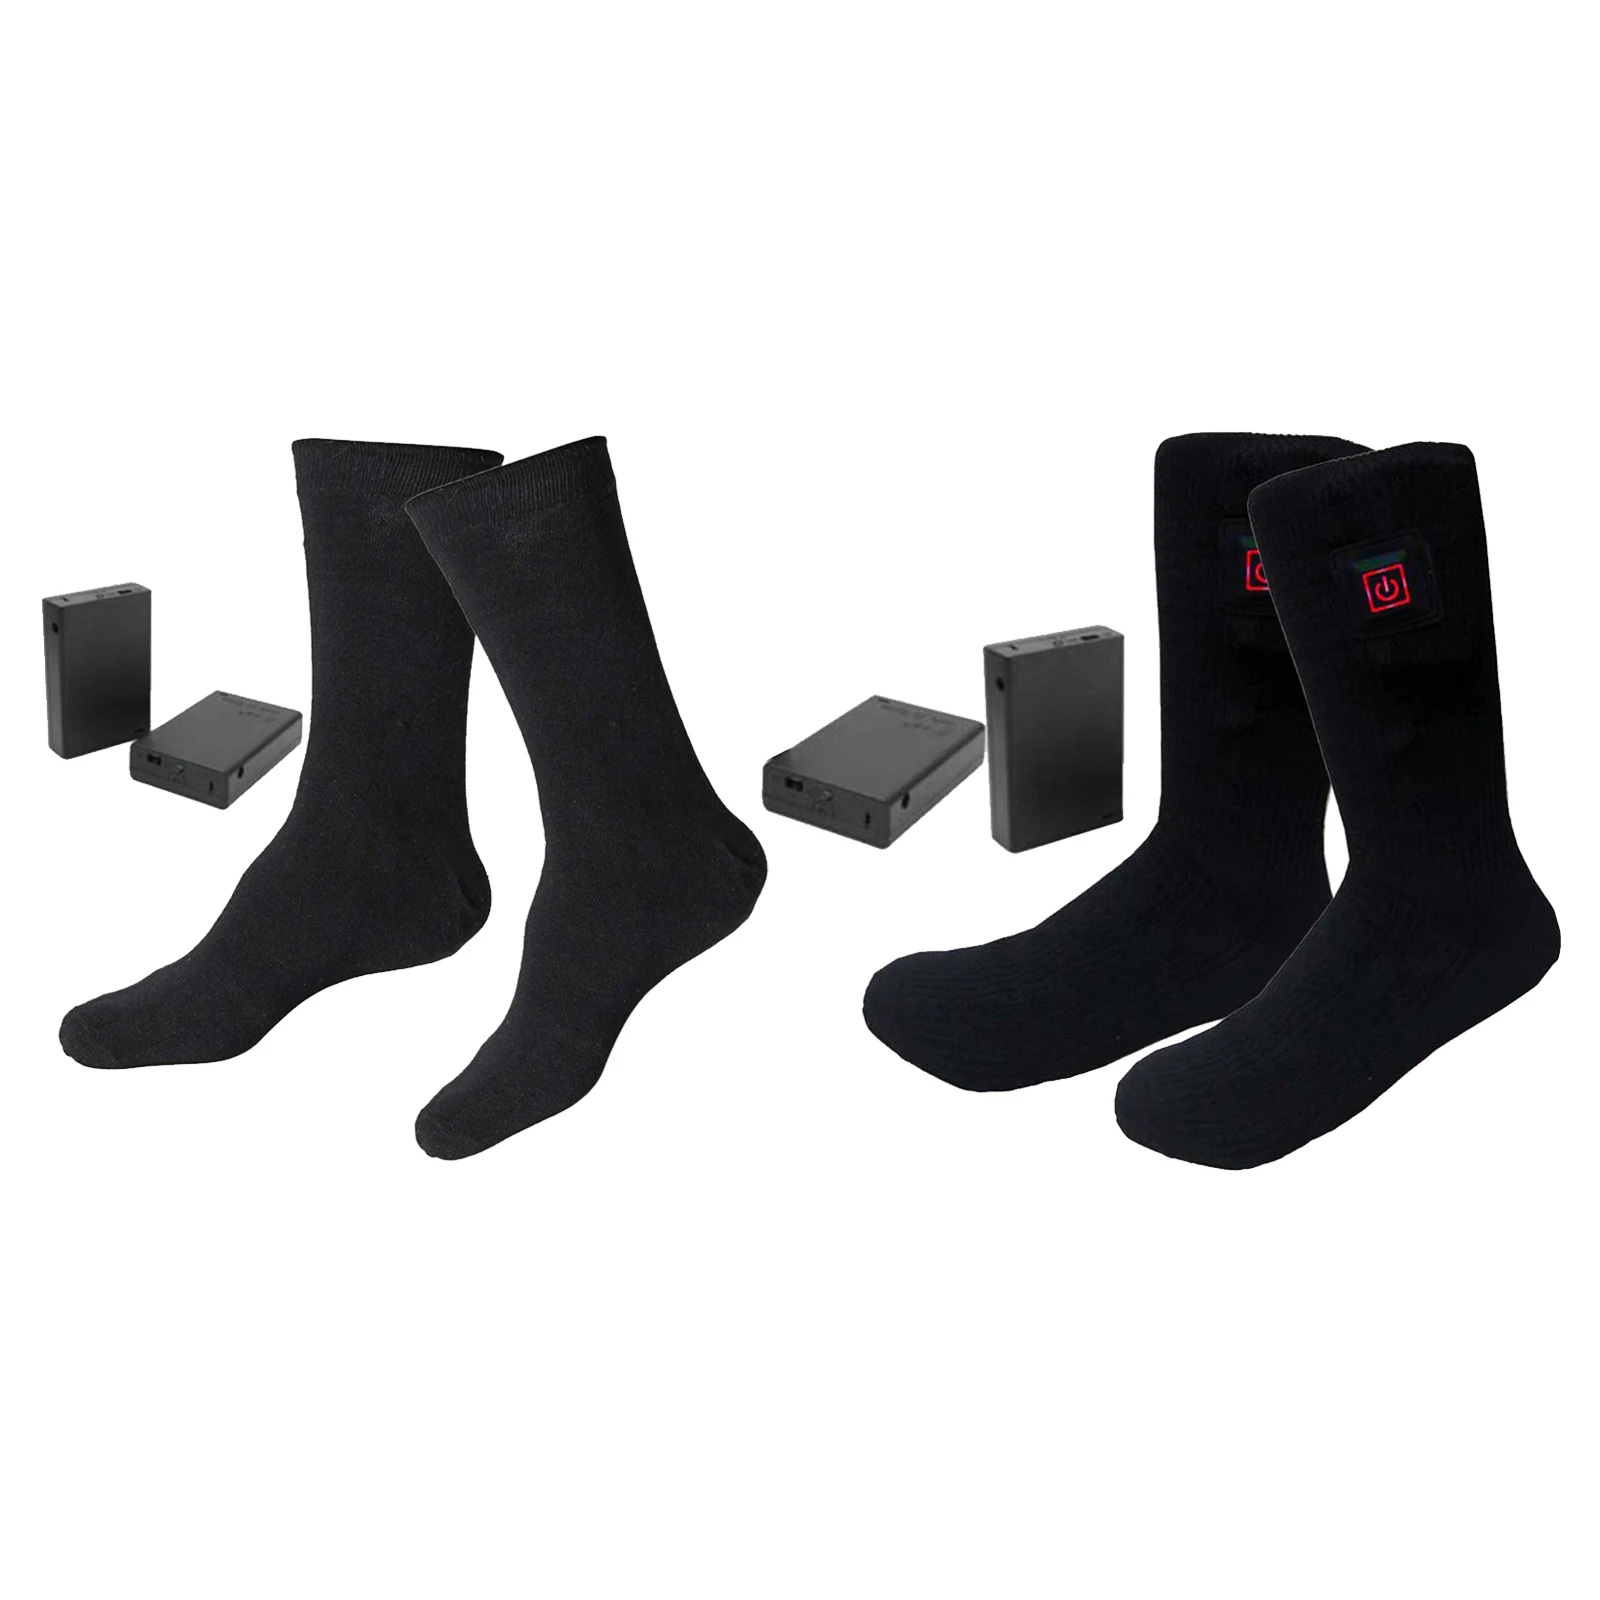 Heated Socks for Men Women - Rechargeable Battery 4.5V Electric Socks with Large